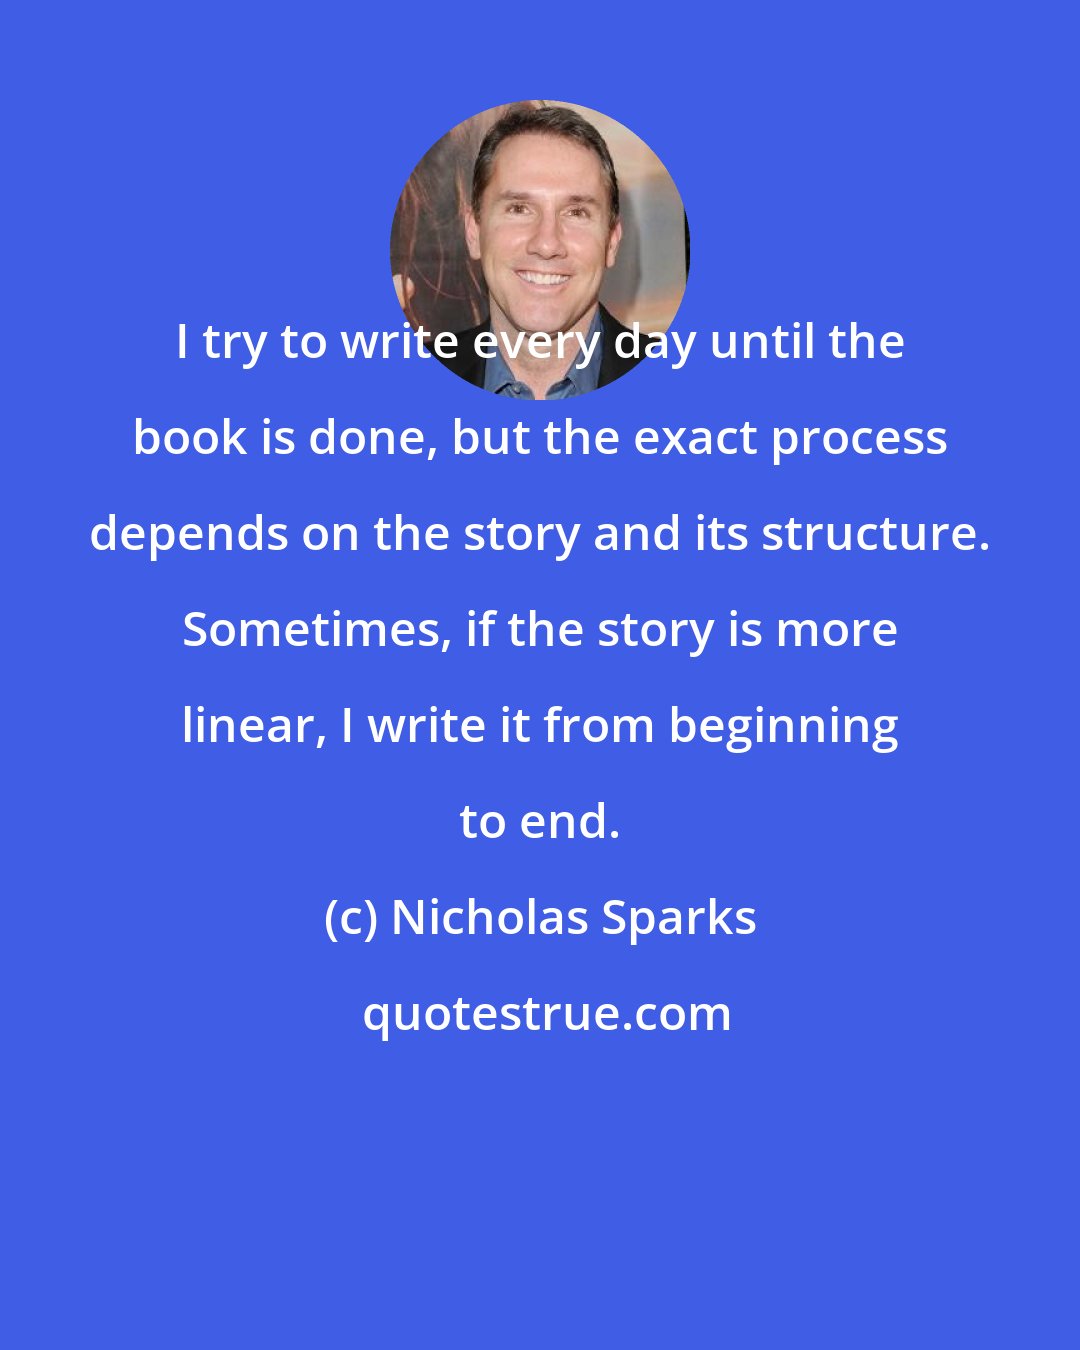 Nicholas Sparks: I try to write every day until the book is done, but the exact process depends on the story and its structure. Sometimes, if the story is more linear, I write it from beginning to end.